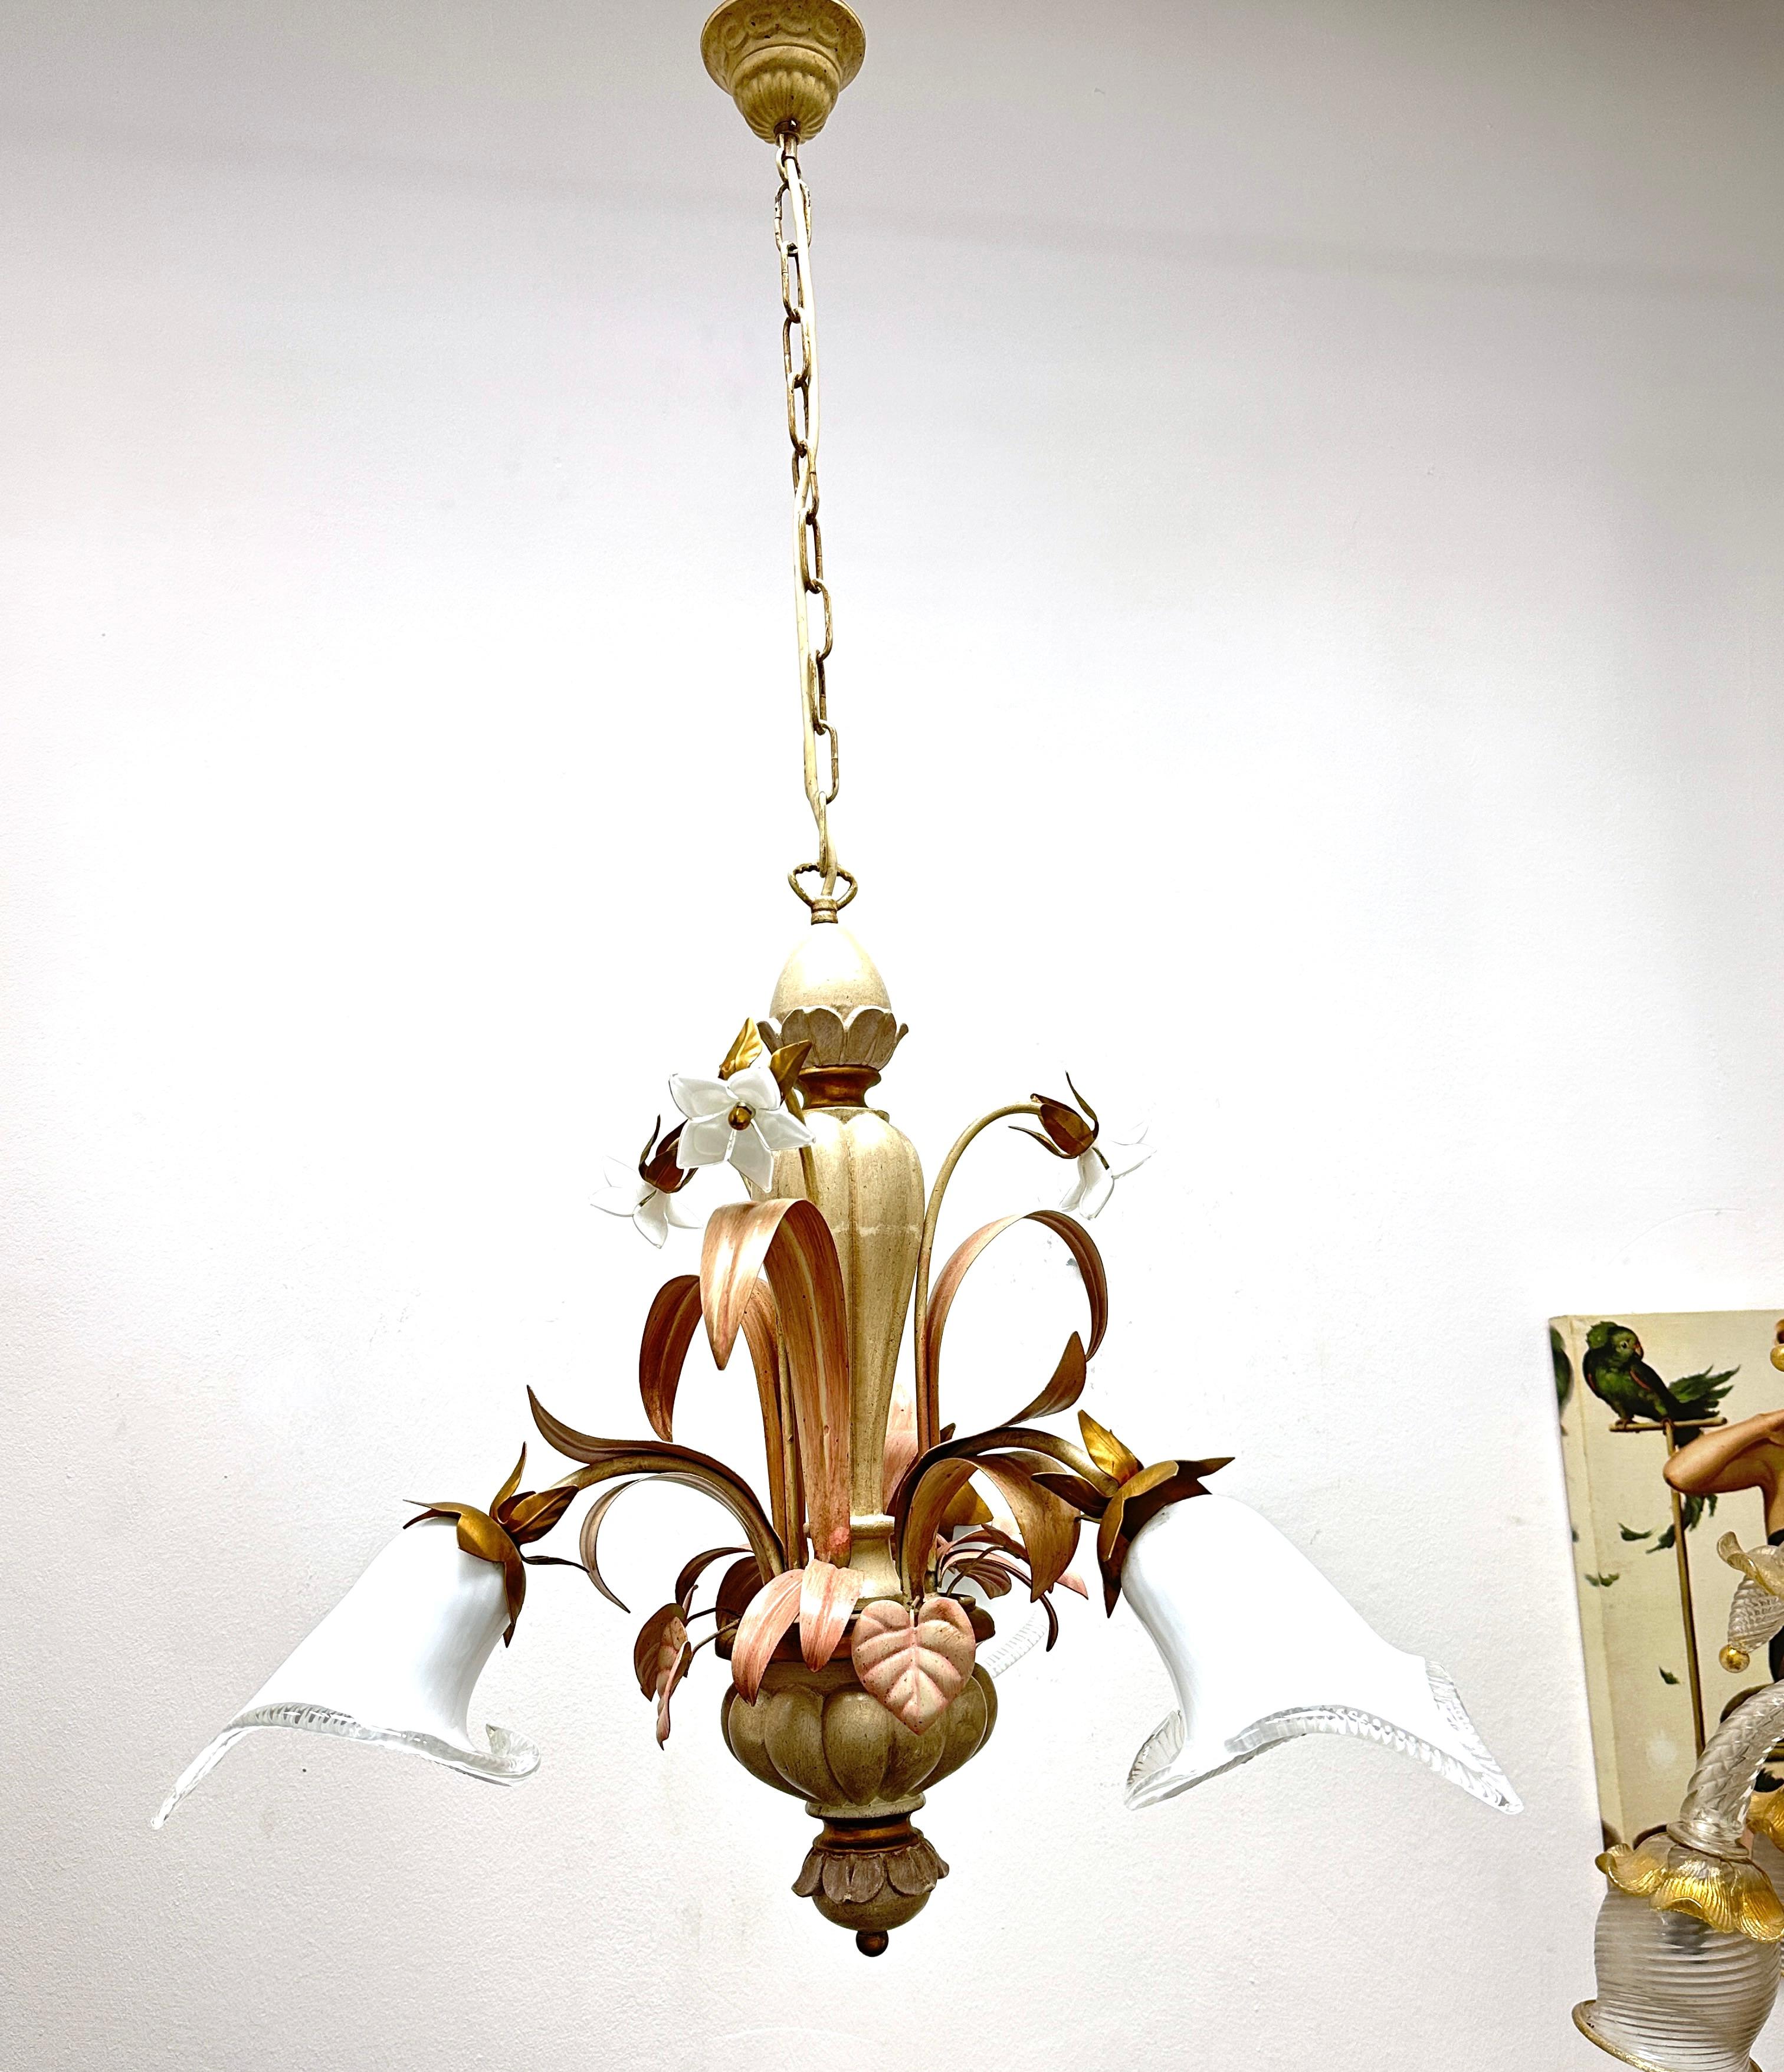 Florentine Baroque Style Polychrome Wood 3 Light Chandelier by Eglo Austria In Good Condition For Sale In Nuernberg, DE